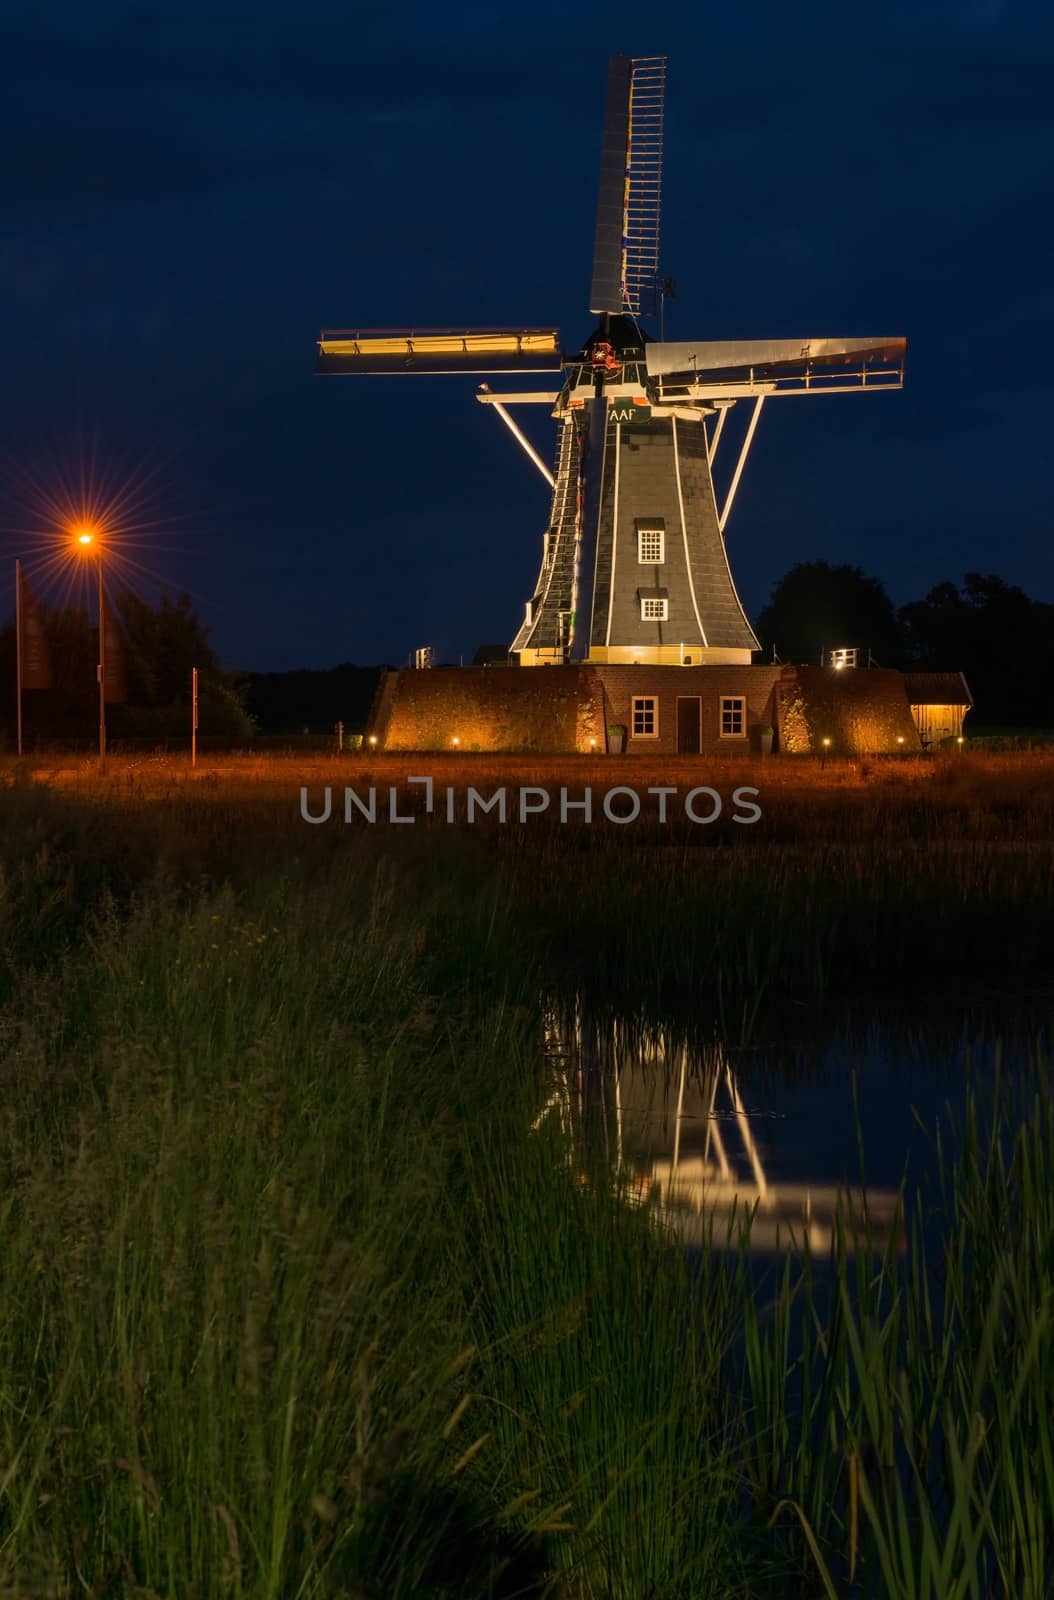 Authentic renovated windmill in the Netherlands by Tofotografie